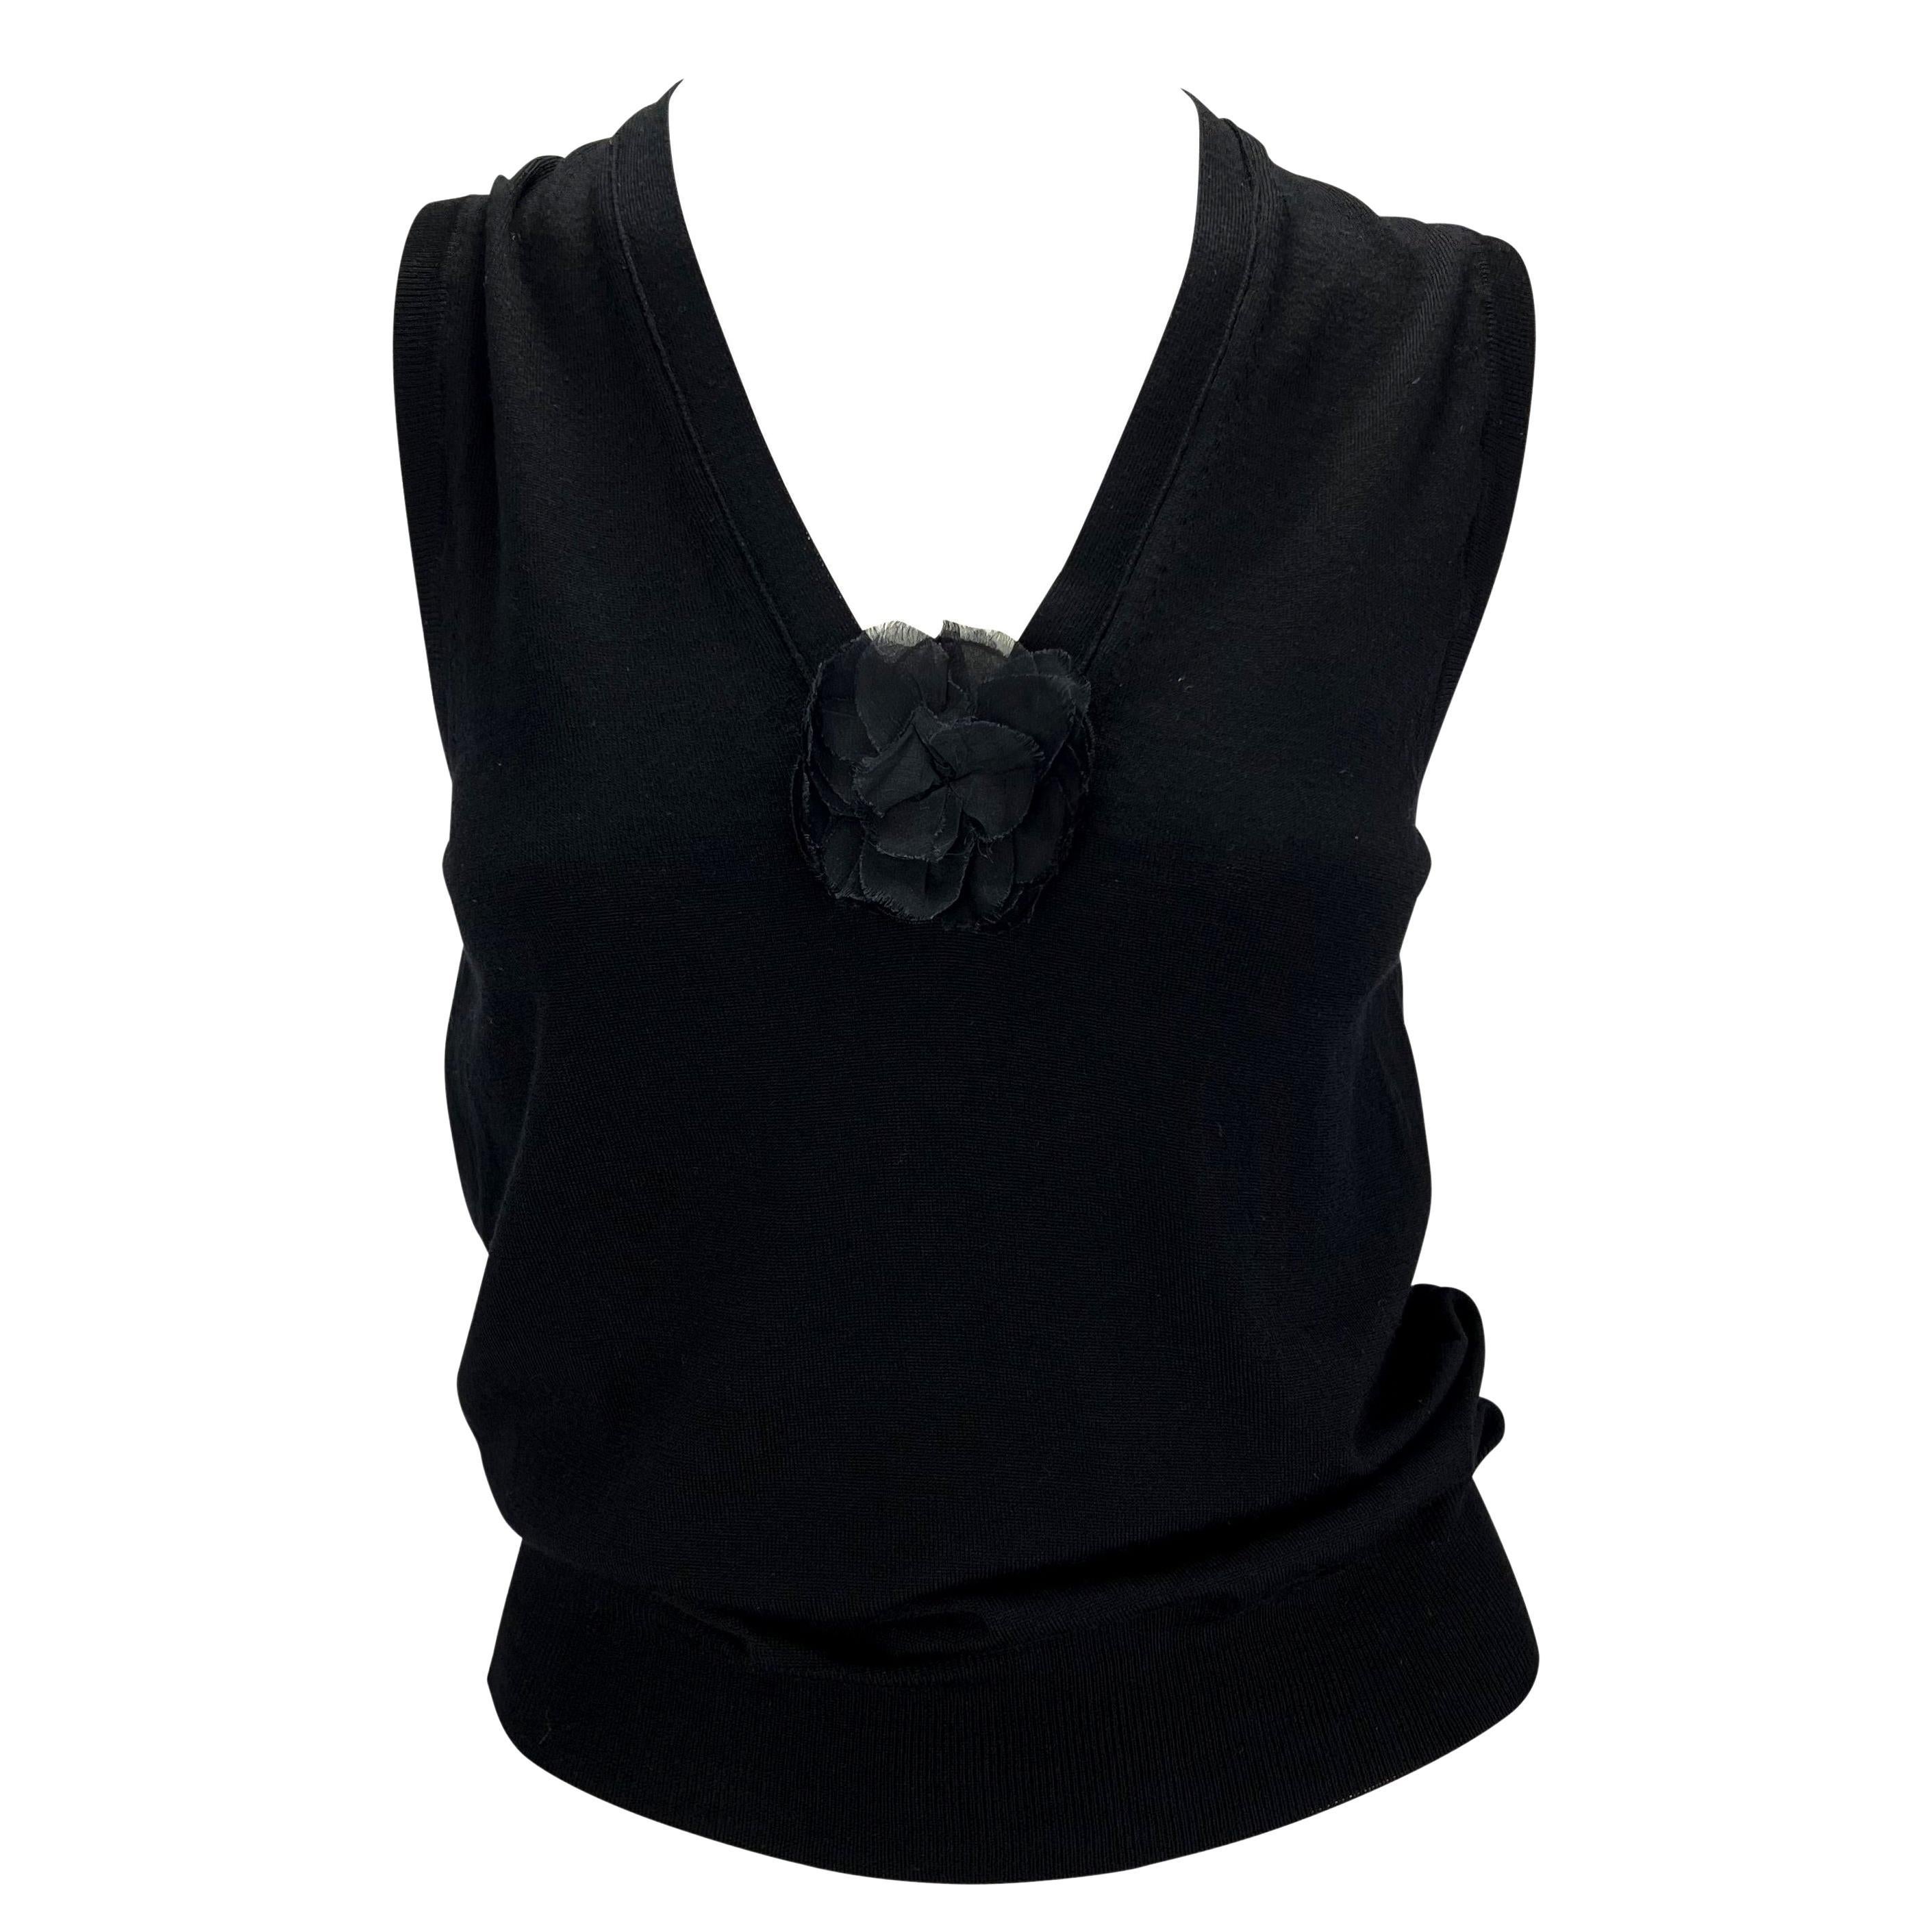 TheRealList presents: a black wool sweater vest designed by Tom Ford for Yves Saint Laurent Rive Gauche's Spring/Summer 2003 collection. This stretchy, semi-sheer piece features a chiffon flower appliqué at the bust, accenting the v-shaped neckline.